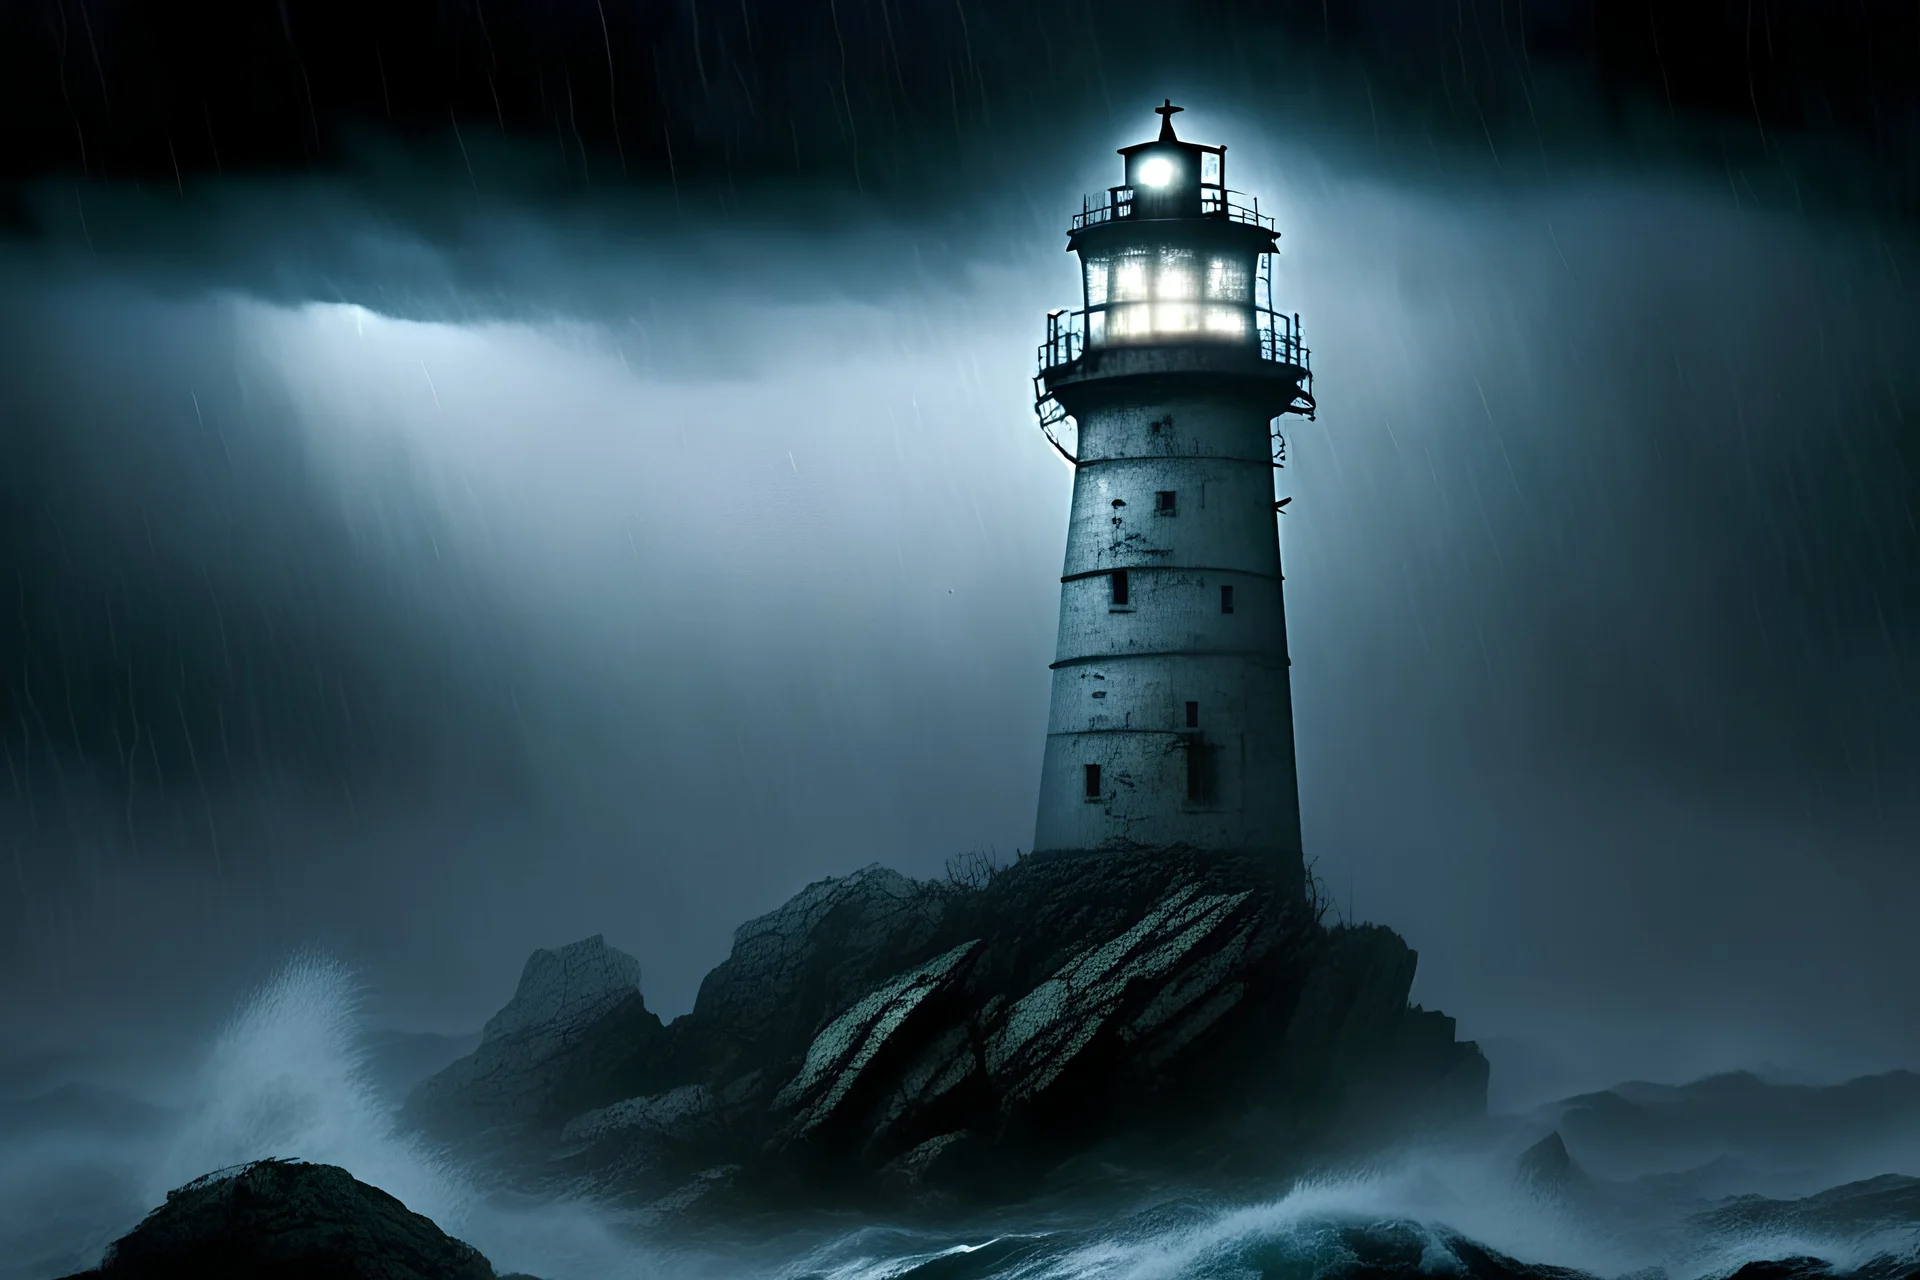 An old grey stone lighthouse, towering ominously against a backdrop of((a small, abandoned wooden lifeboat bobbing in stormy rolling waves))) and a (((dense fog bank)))crawling onto the lighthouse (((a dark, stormy night))) . The structure casts a (mysterious glow) across the churning waters."